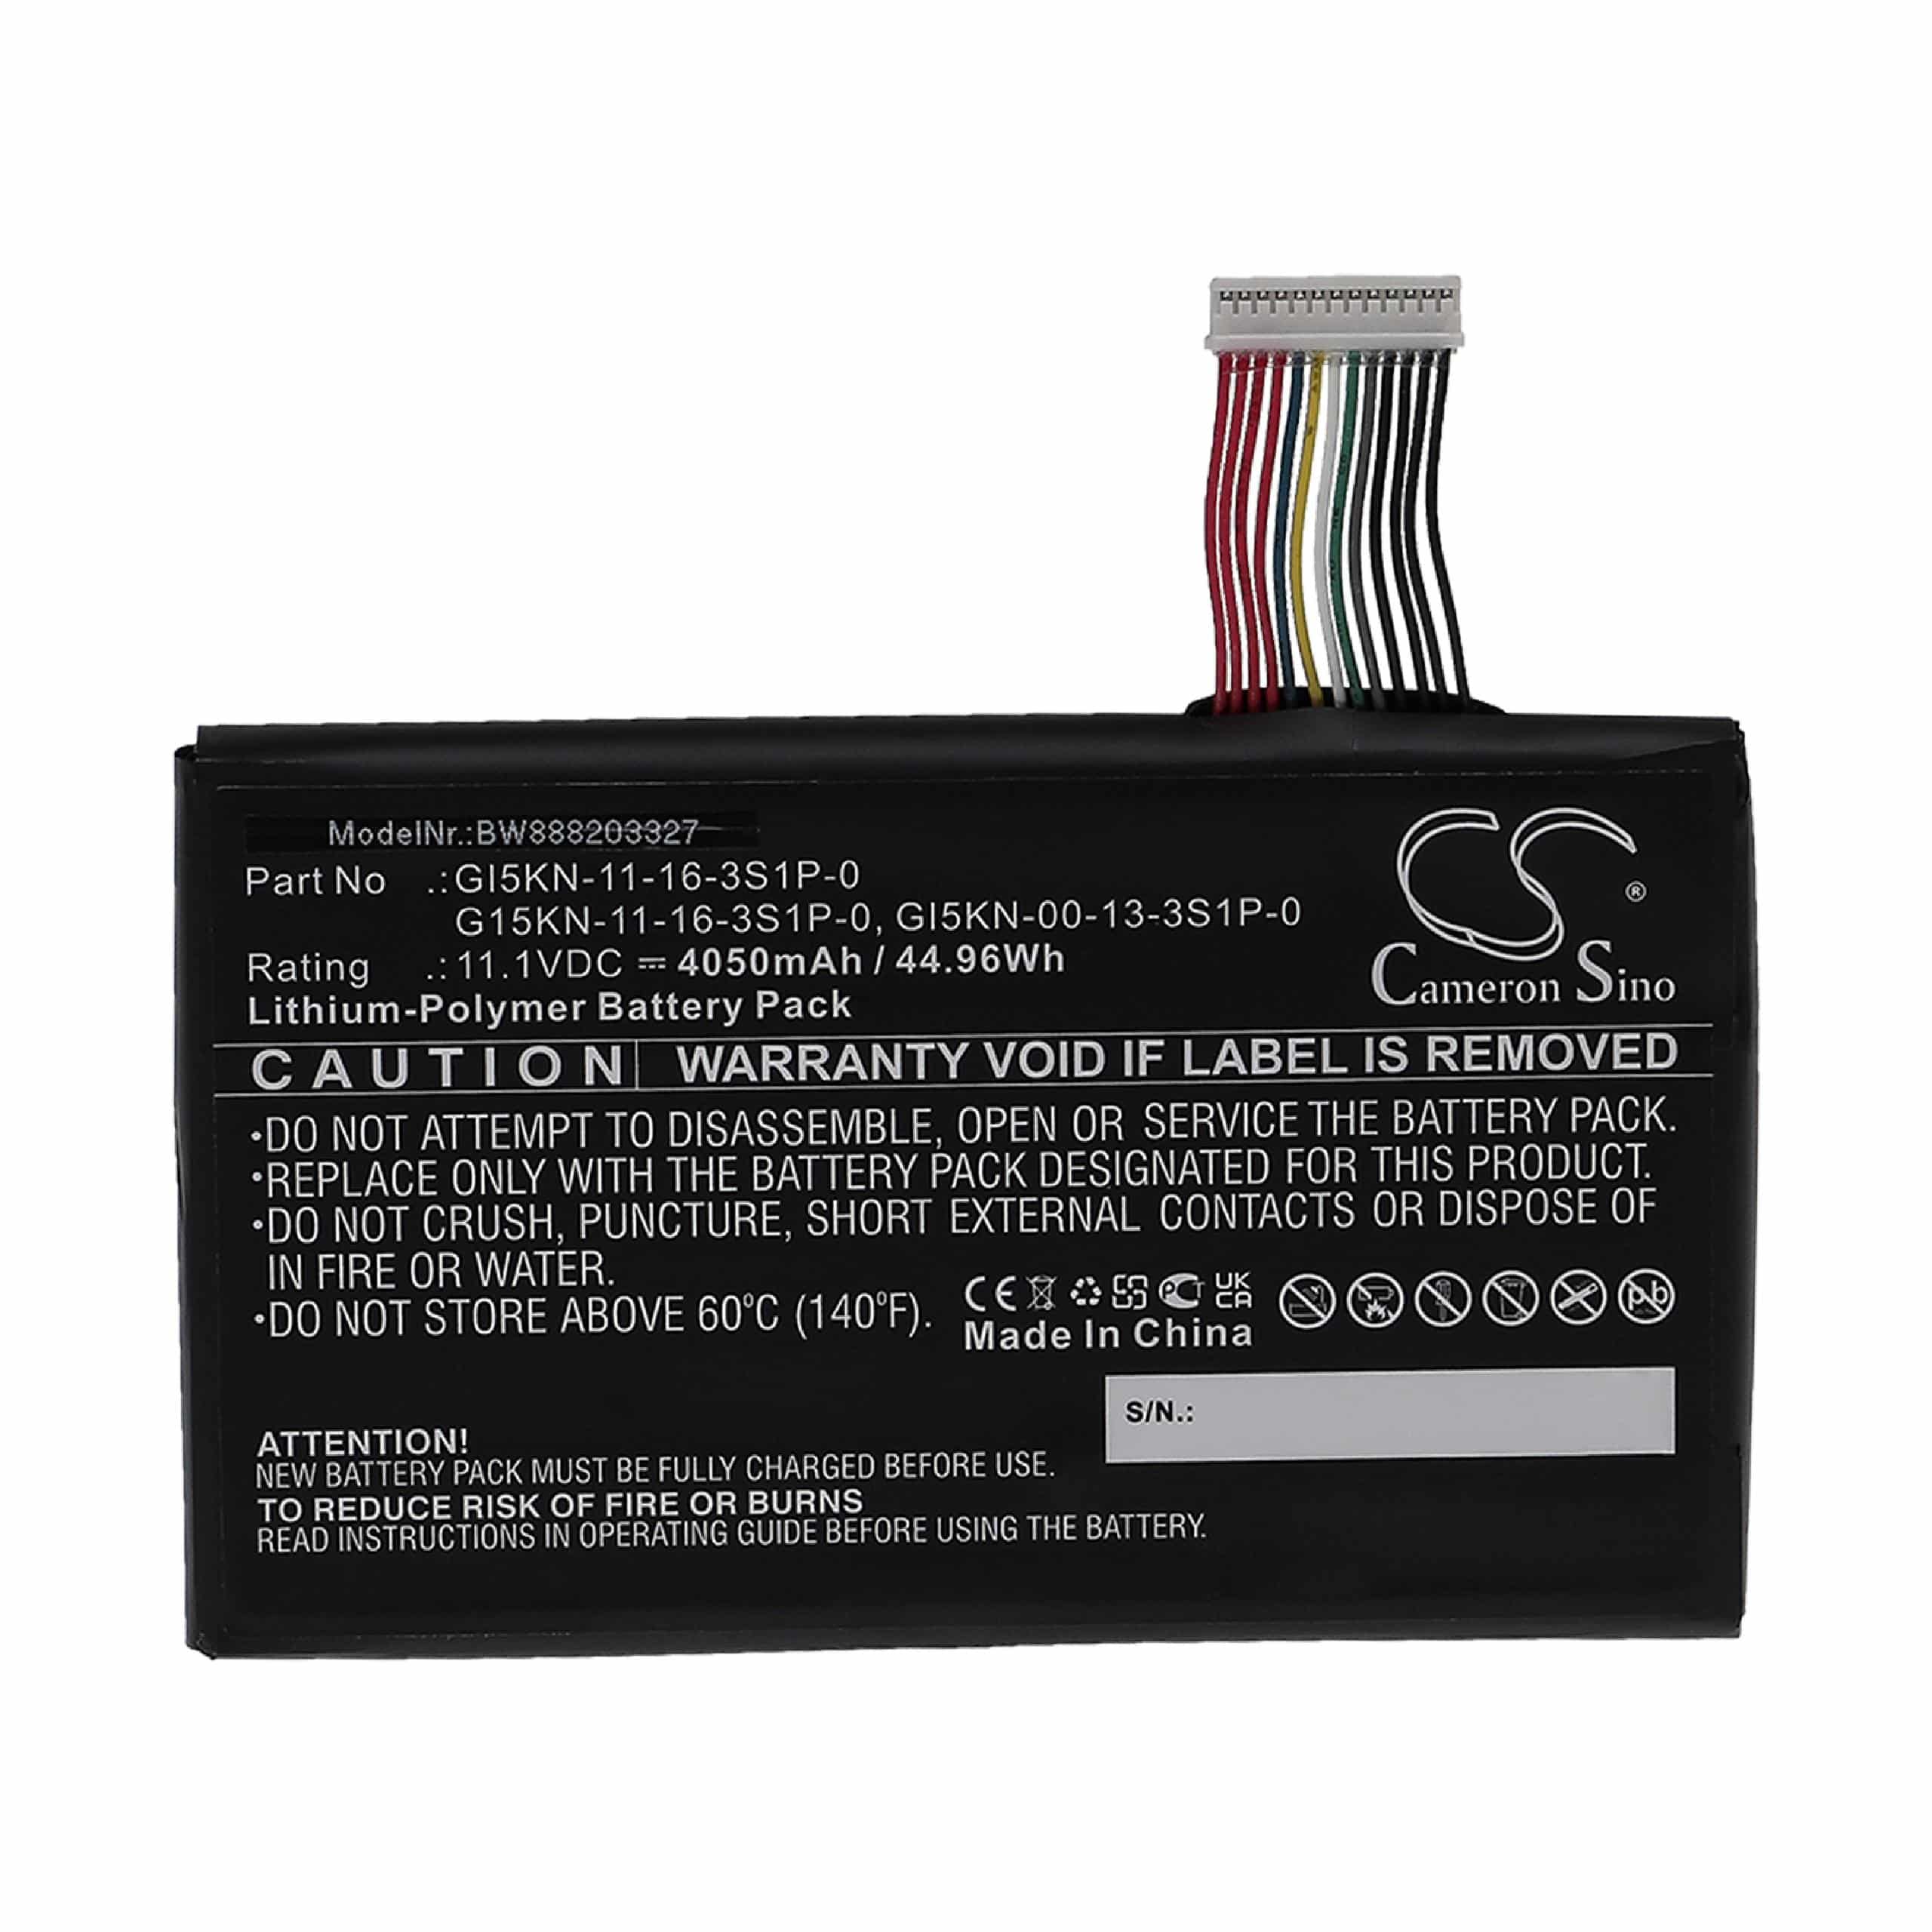 Notebook Battery Replacement for Hasee GI5KN-00-13-3S1P-0, G15KN-11-16-3S1P-0 - 4050mAh 11.1V Li-polymer